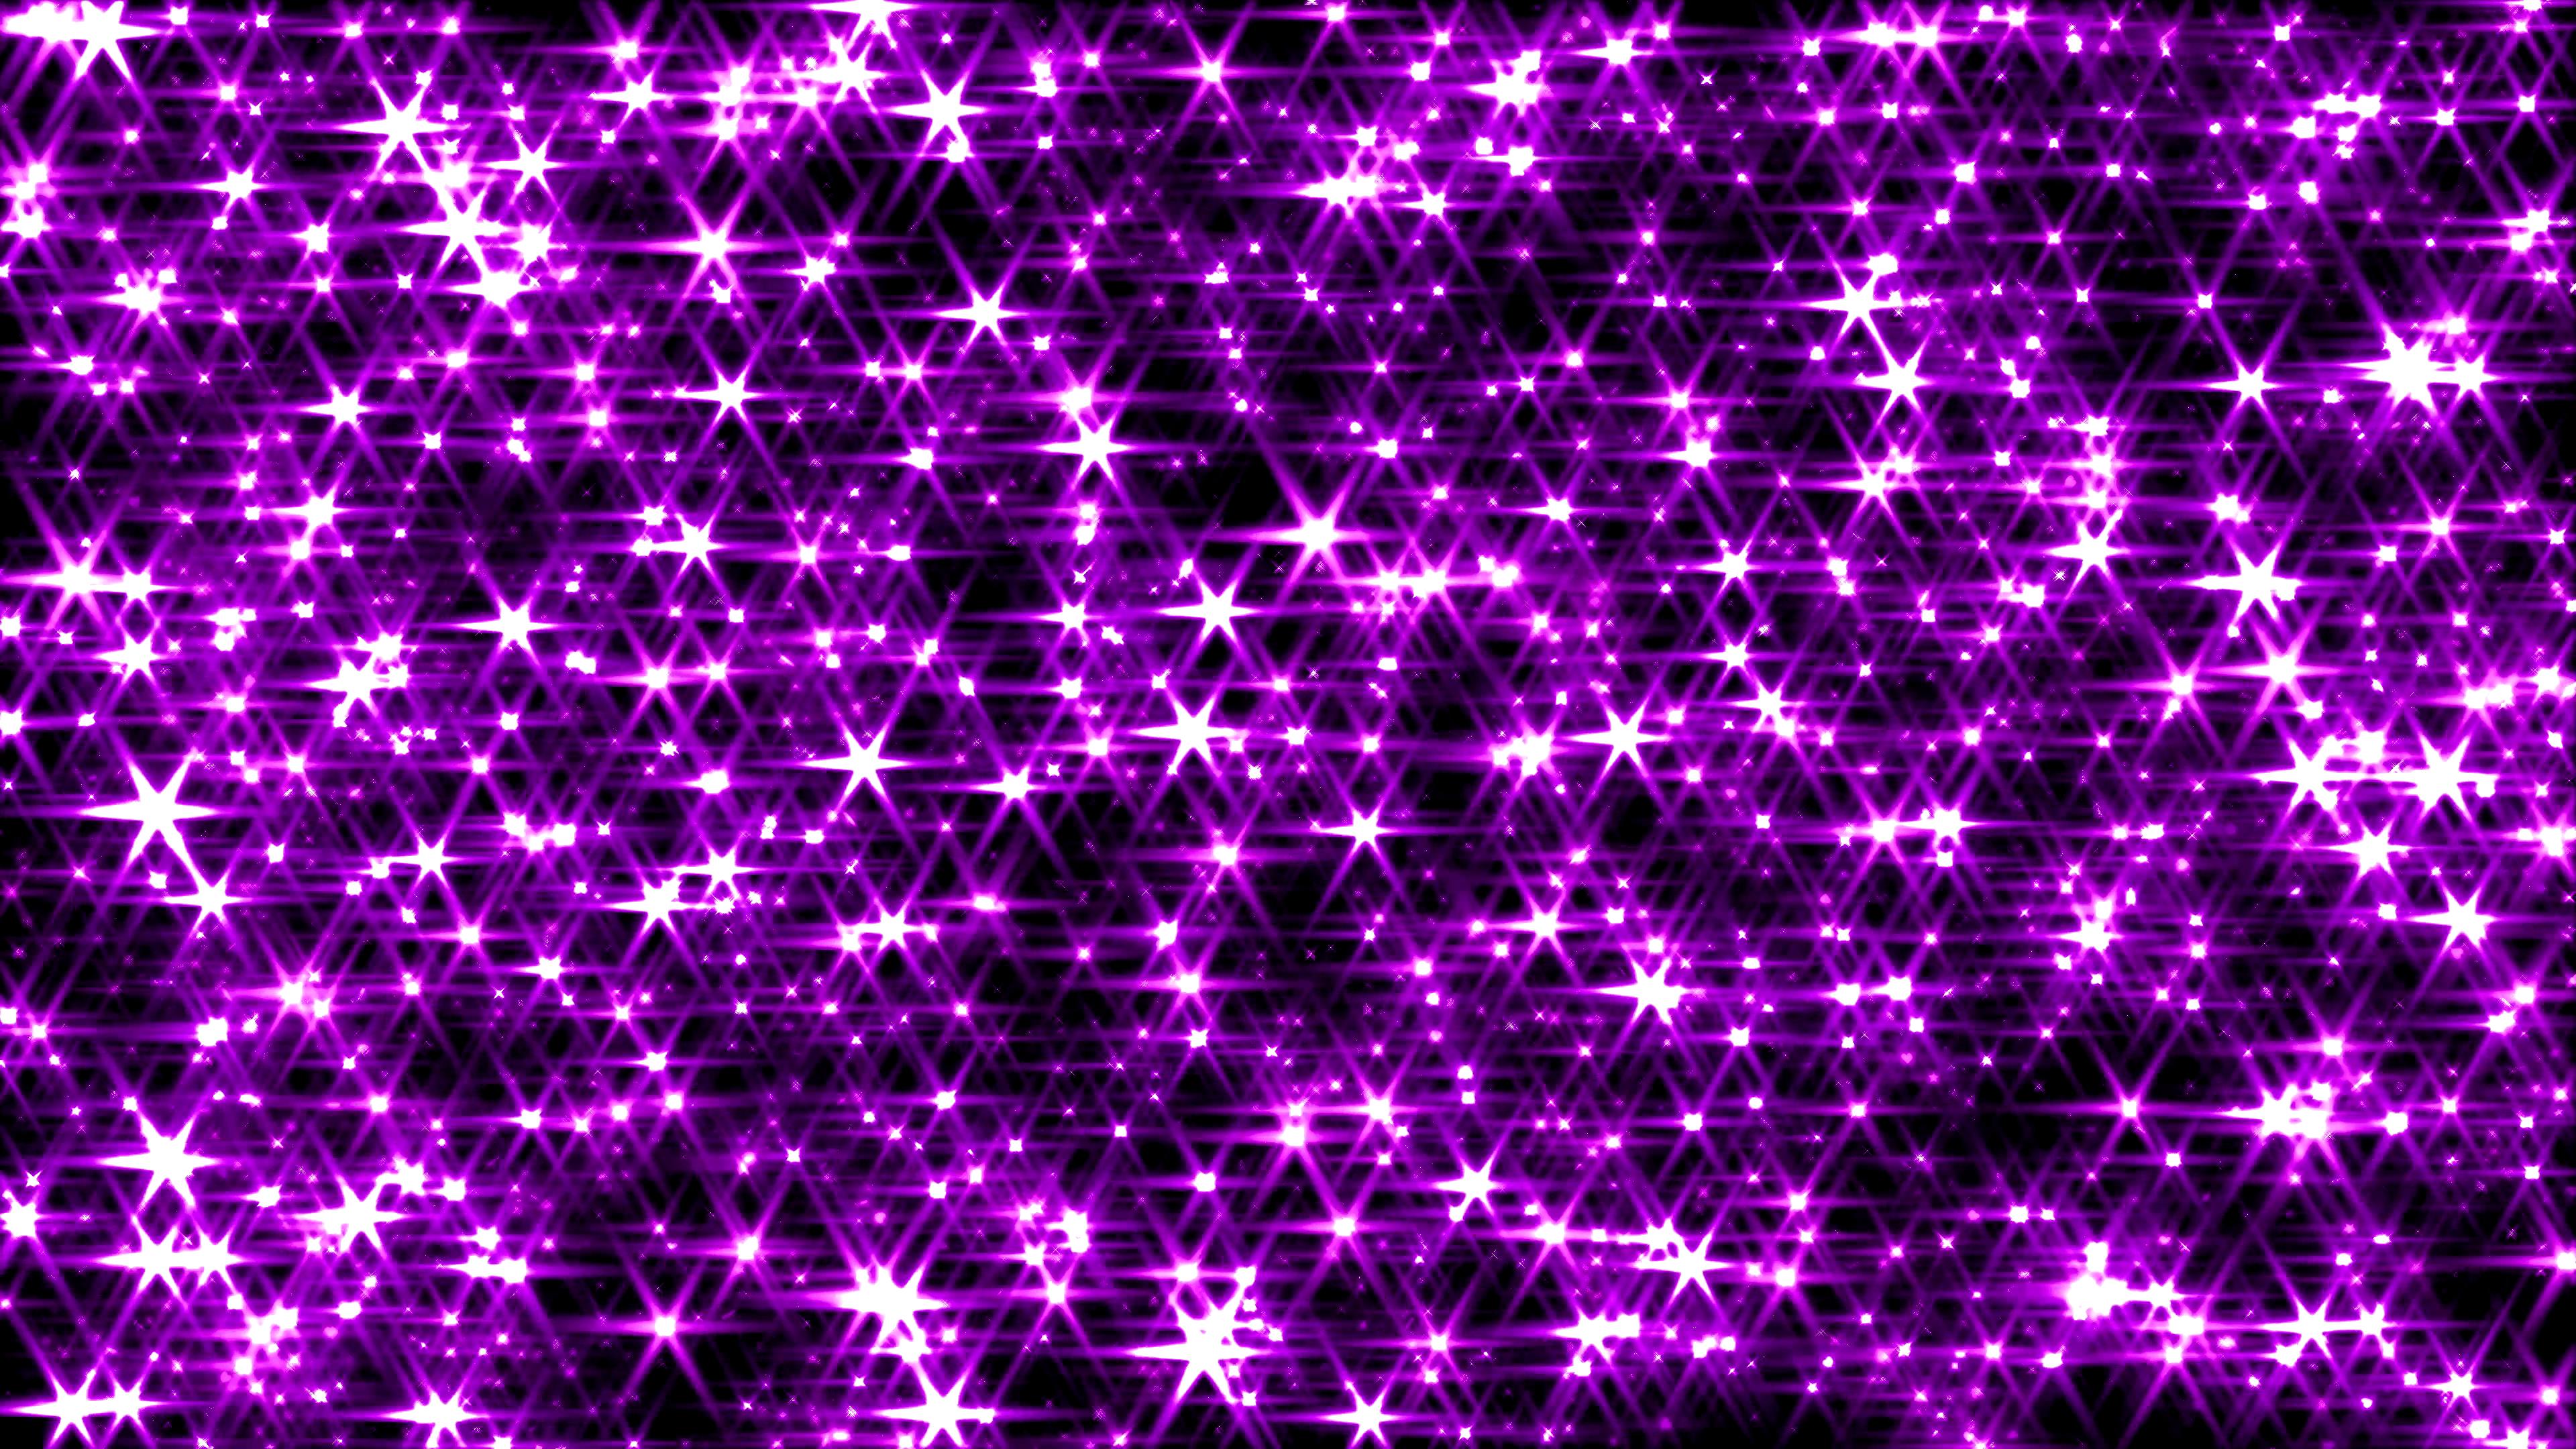 moving sparkle backgrounds